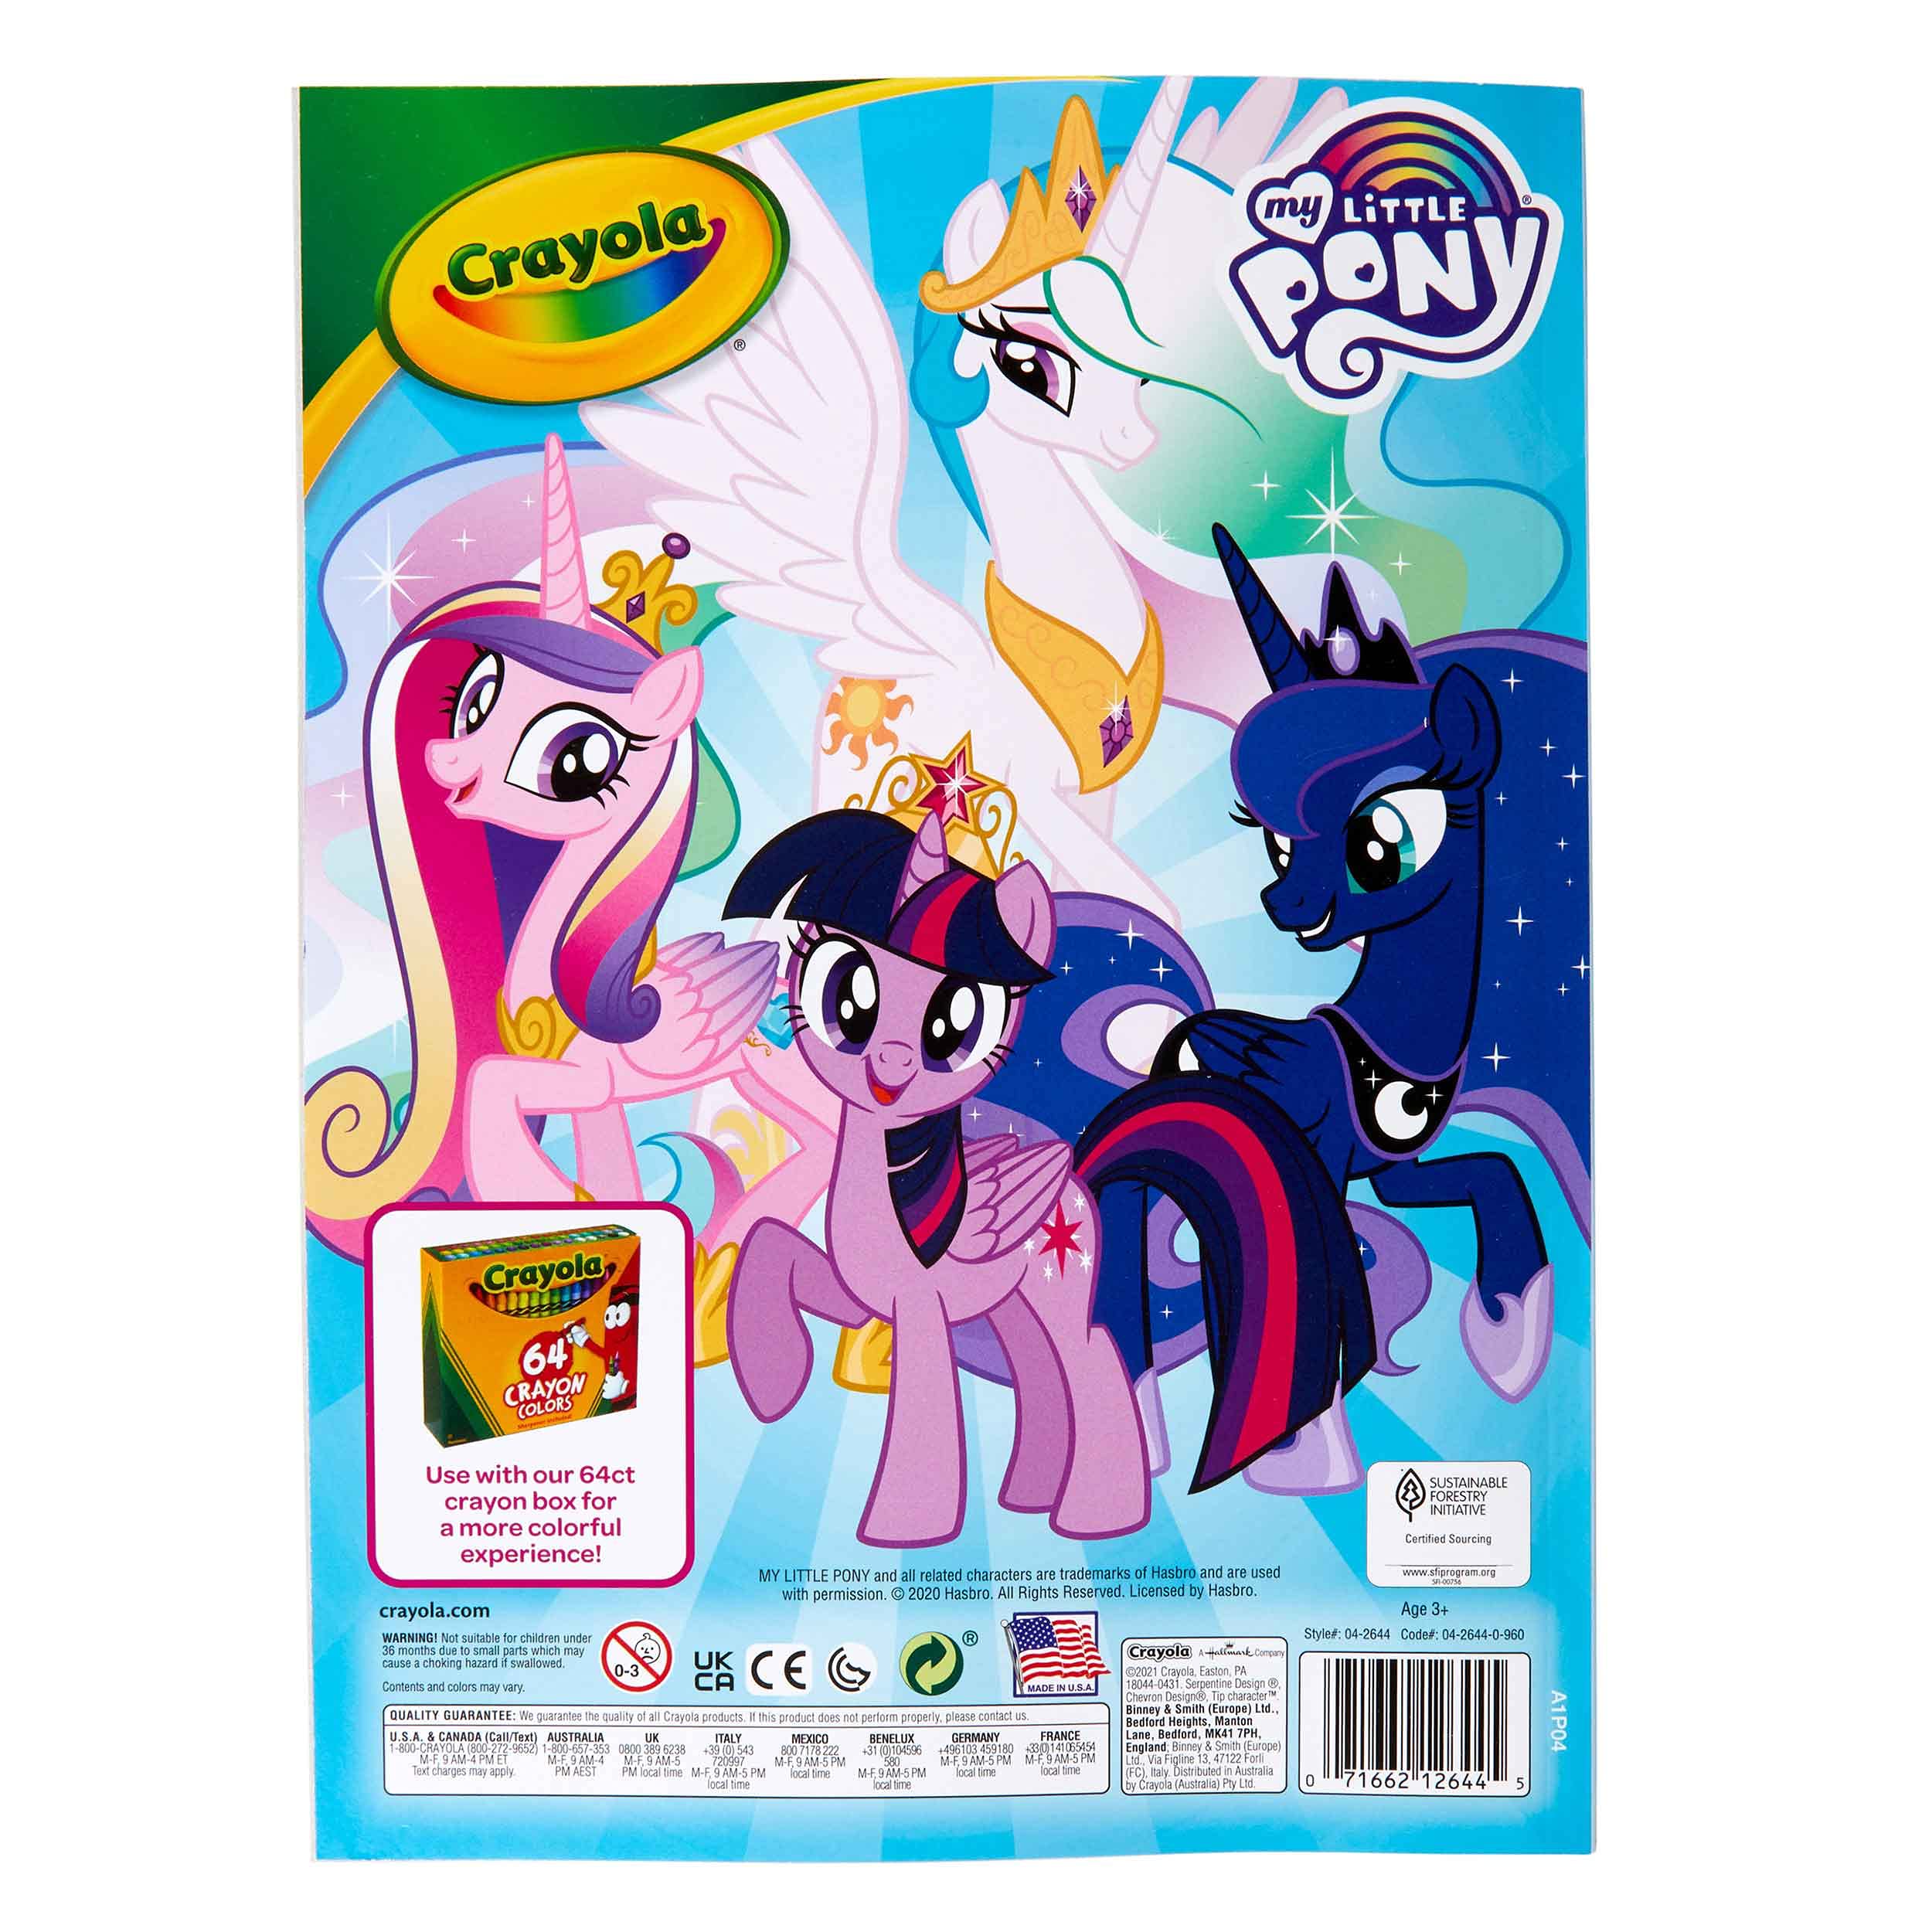 Crayola My Little Pony Coloring Book with Stickers, Gift for Girls and Boys, 96 Pages, Ages 3, 4, 5, 6